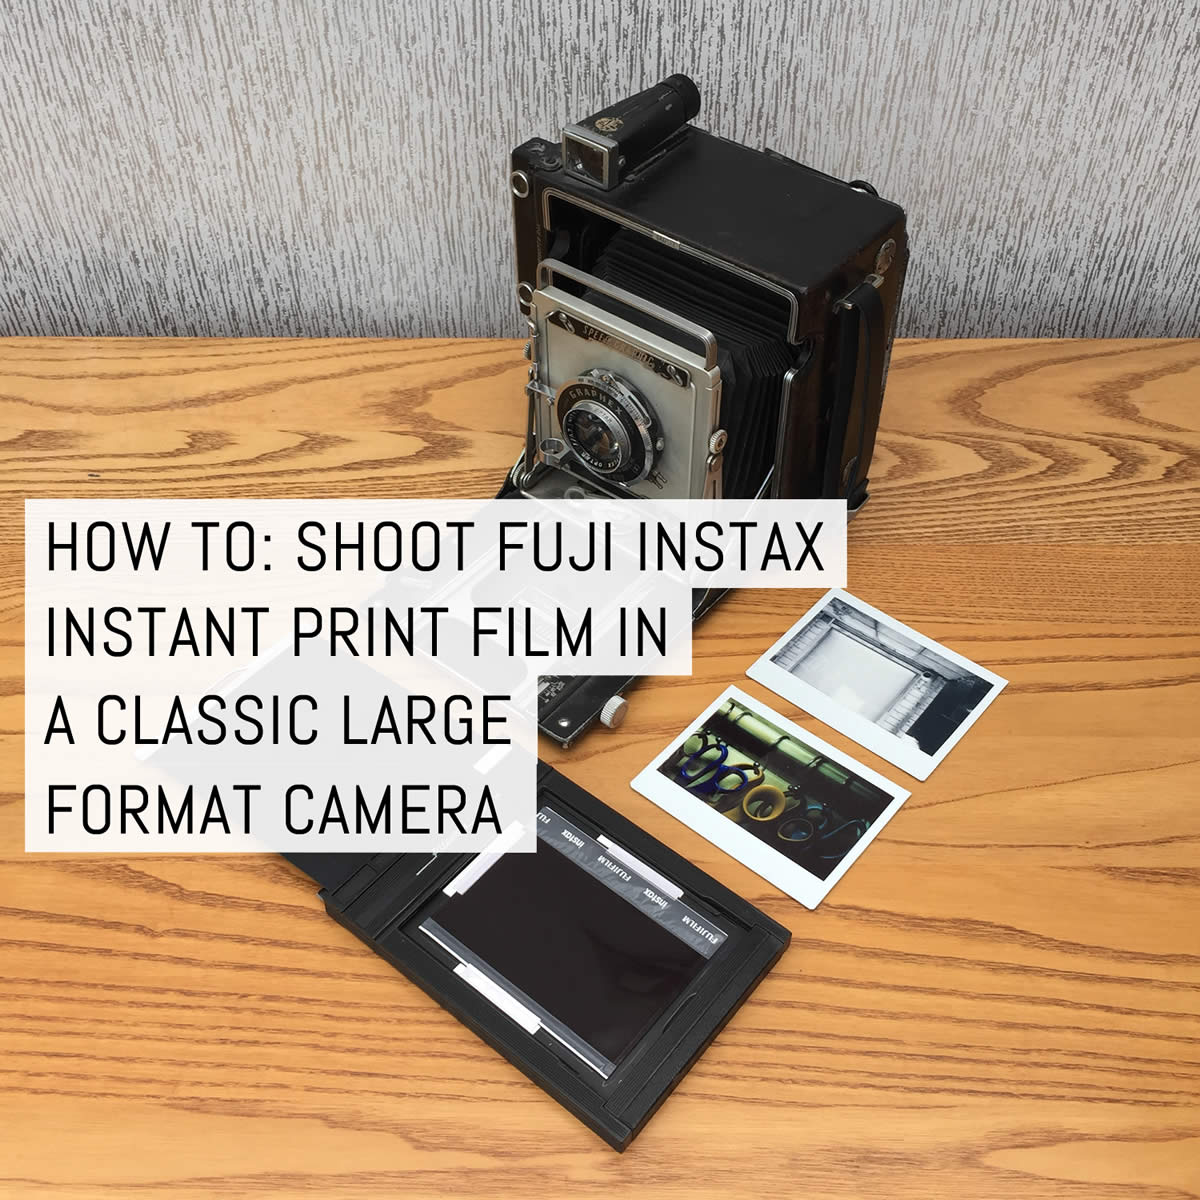 Cover - How to - Shoot Fuji Instax instant print film in a classic large format camera